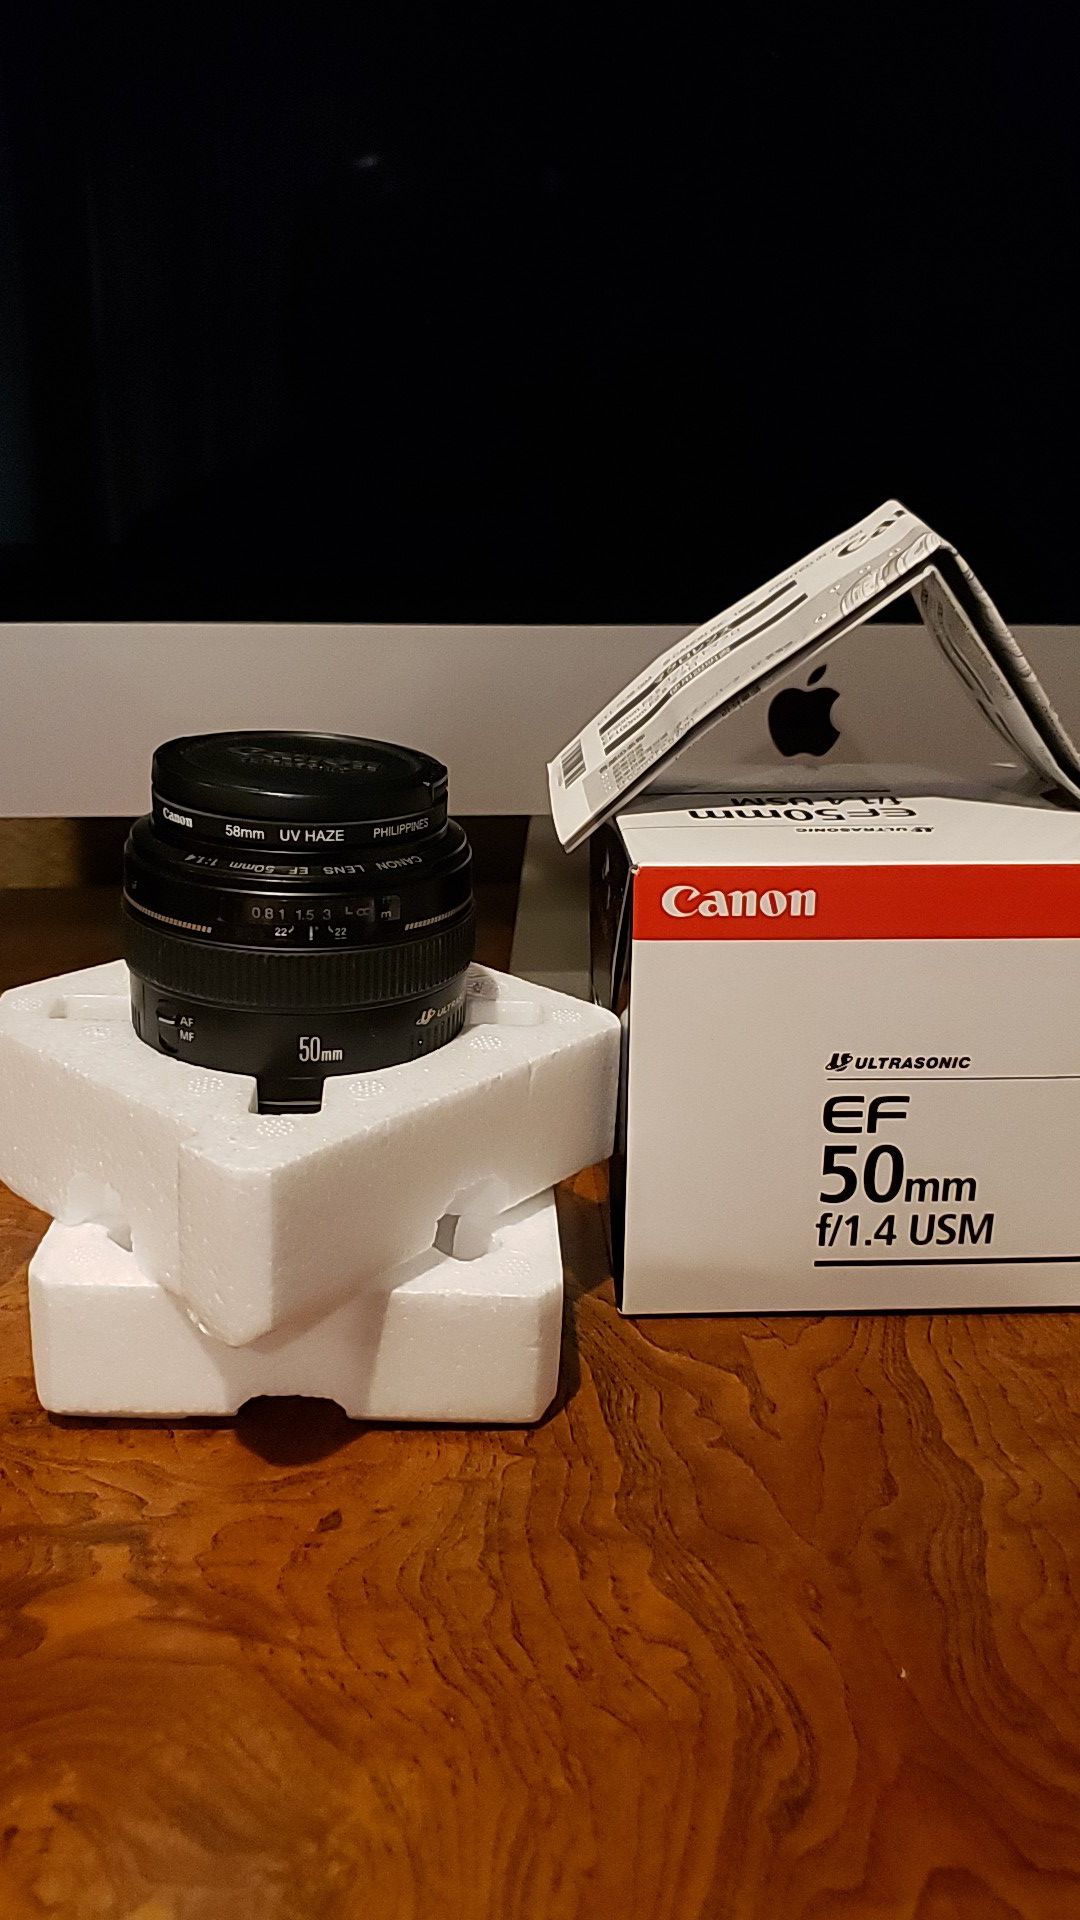 Canon ef 50mm 1.4 ultrasonic lens with uv filter